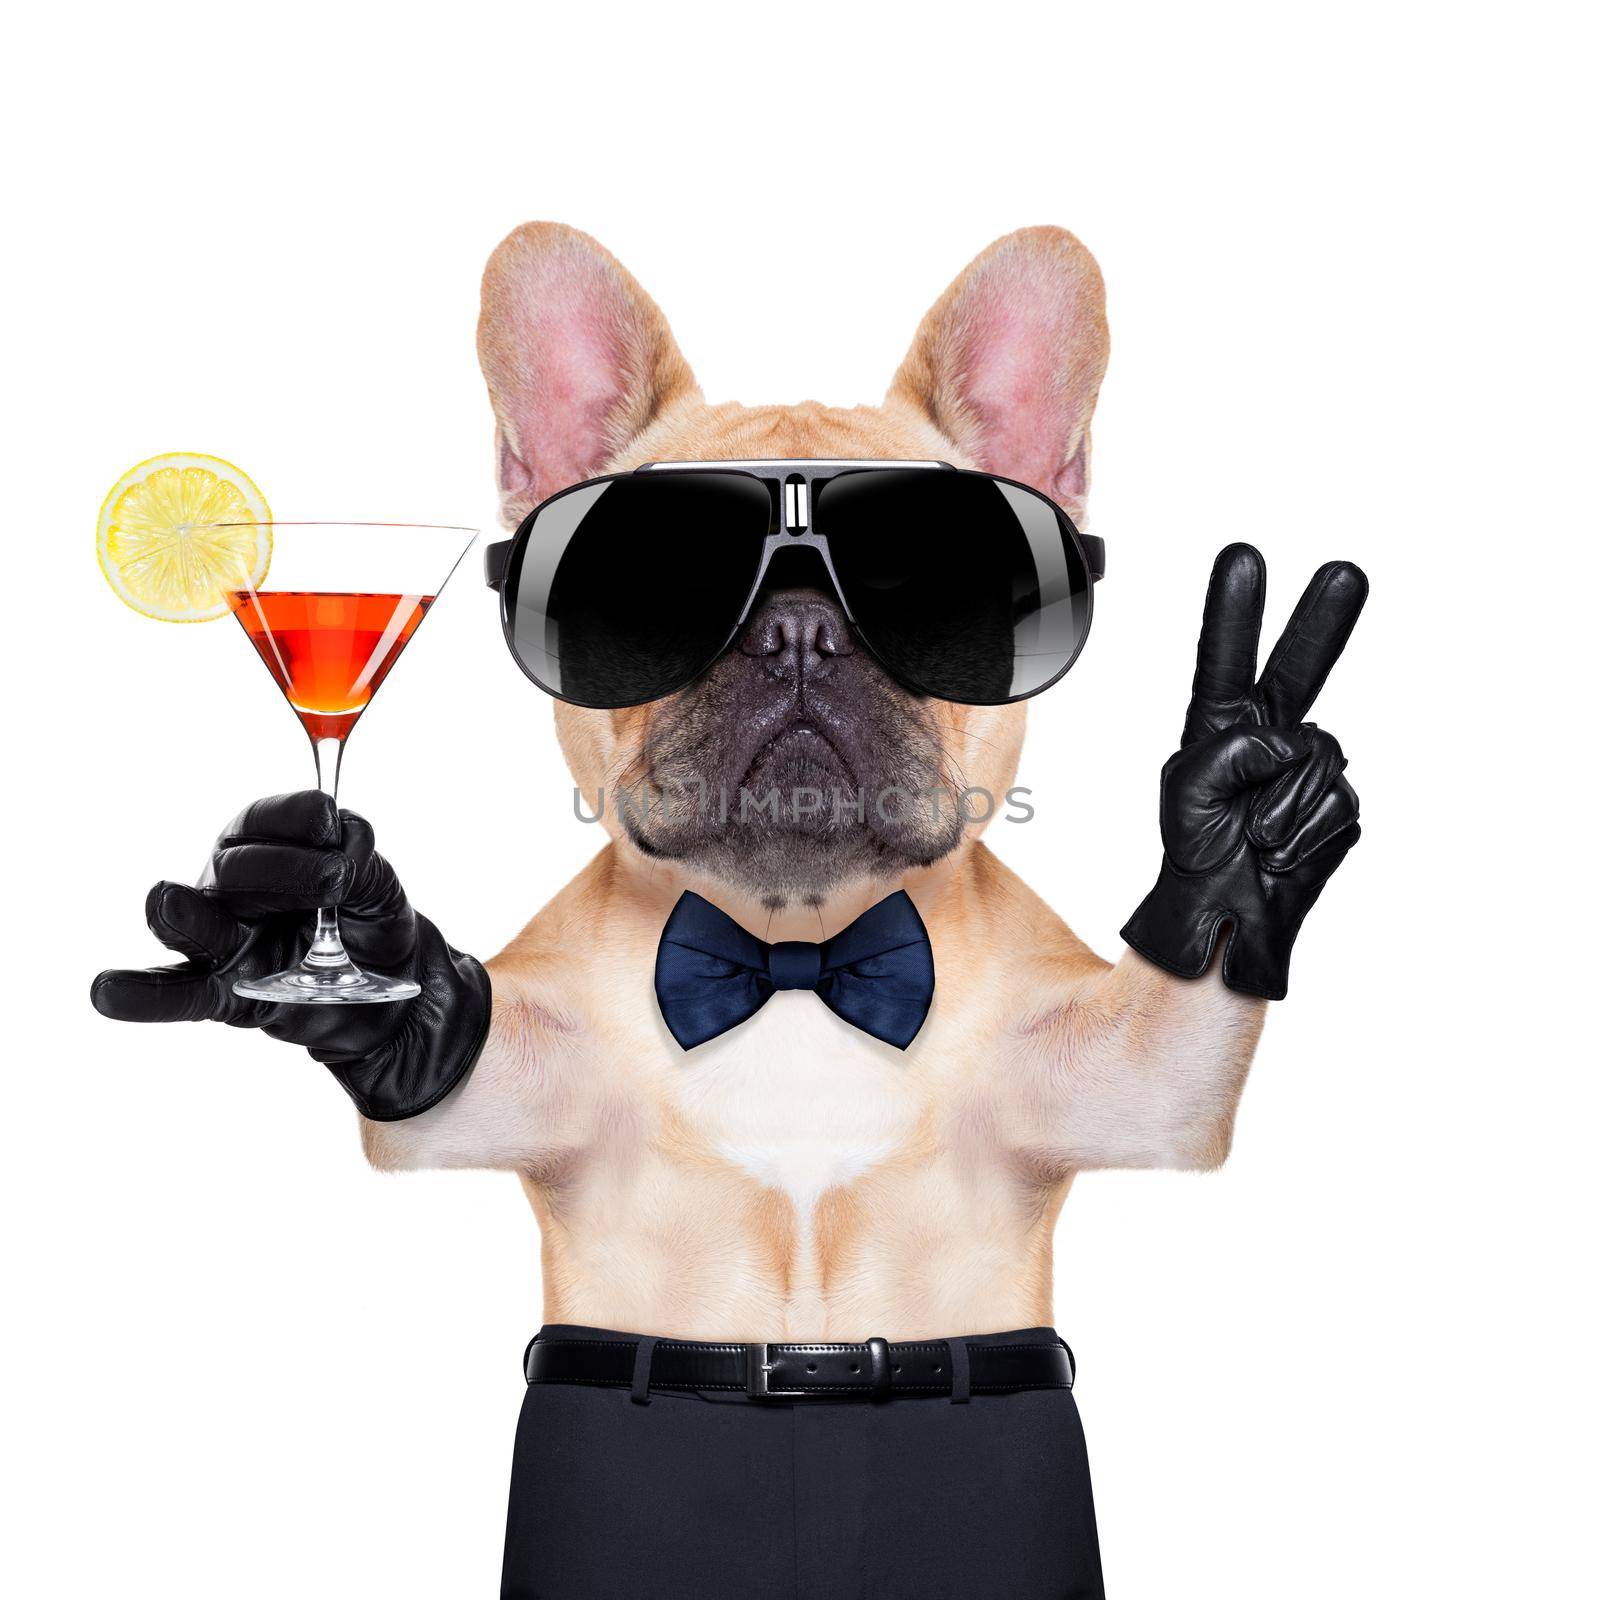 french bulldog holding a  glass of red martini  with peace or victory fingers , ready to toast,  isolated on white background